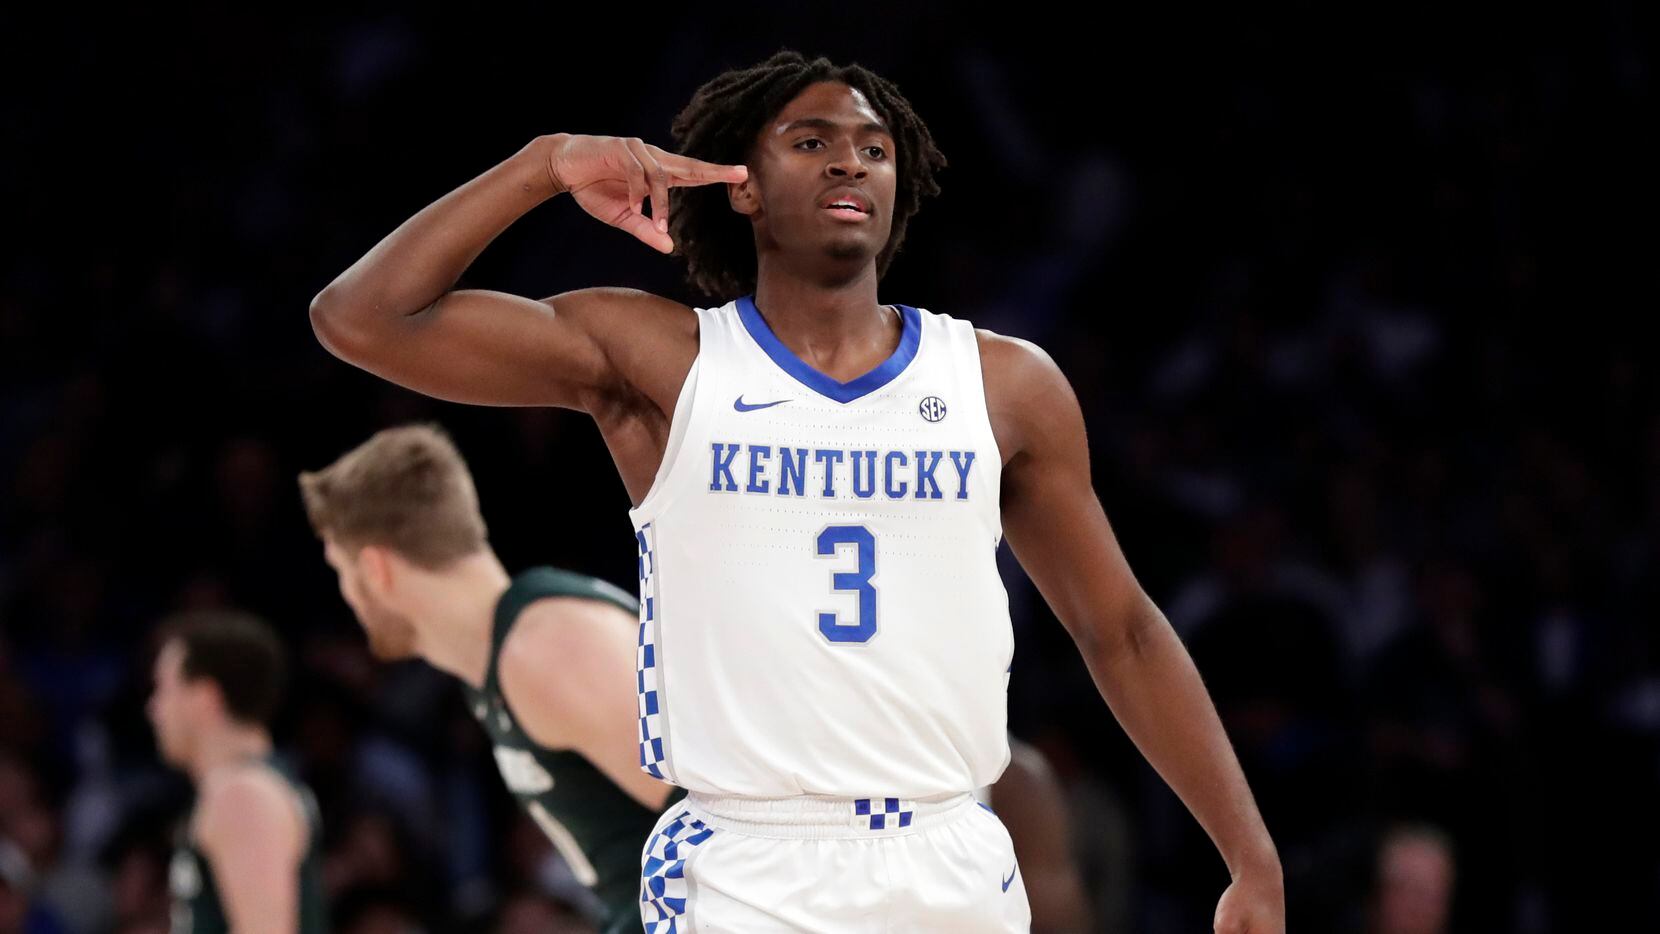 Kentucky guard Tyrese Maxey (3) reacts after making a 3-point basket during the first half of the team's NCAA college basketball game against Michigan State on Tuesday, Nov. 5, 2019, in New York.